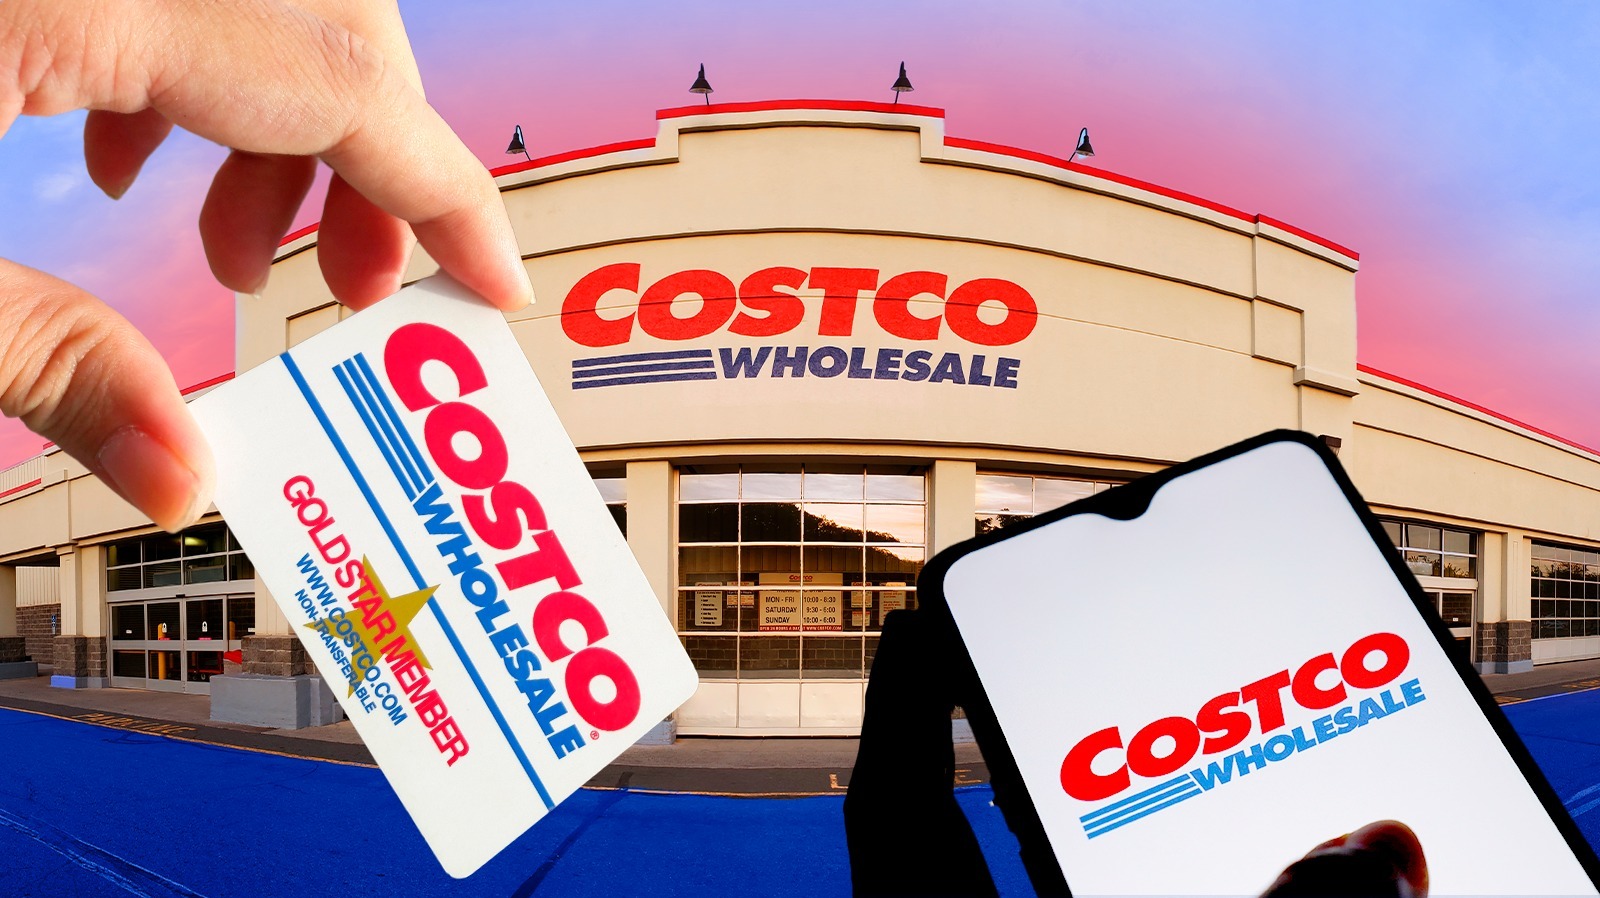 13 Tips To Make Your Costco Shopping Trip Even Better